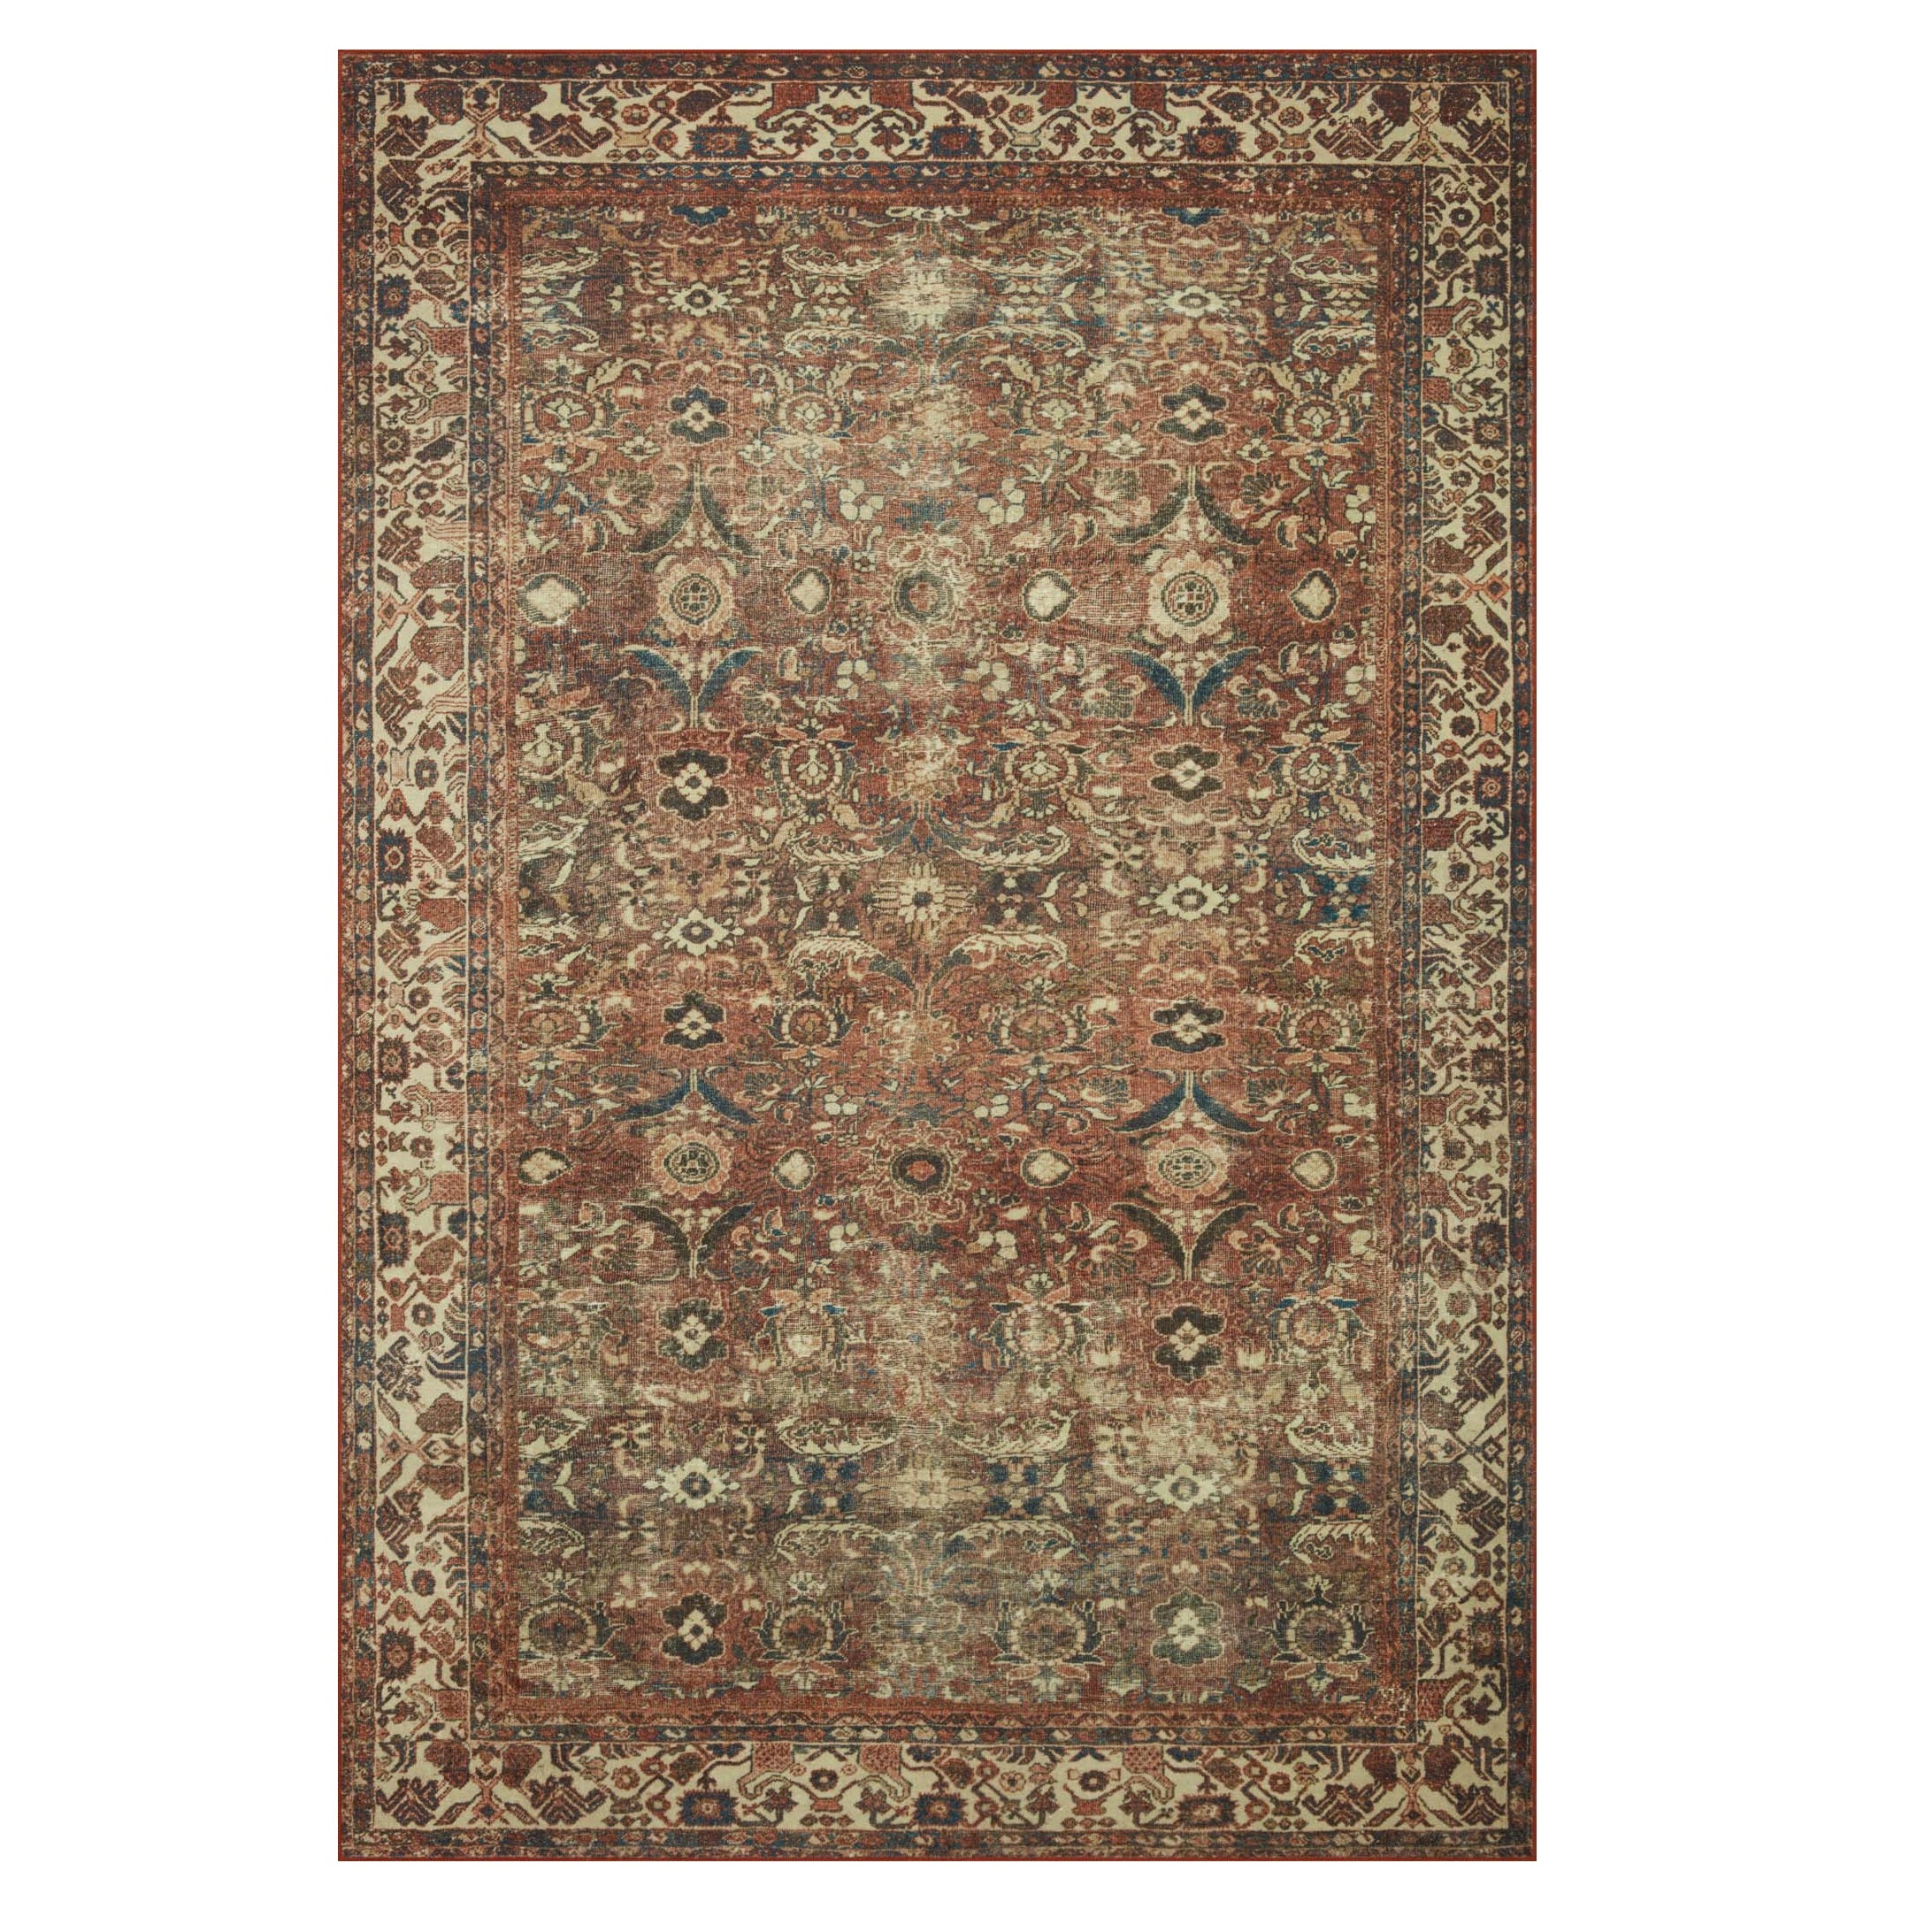 Banks Brick Ivory Rug On sale with items ranging from $63.20 to $767.20, discounted from $79.00 to $959.00